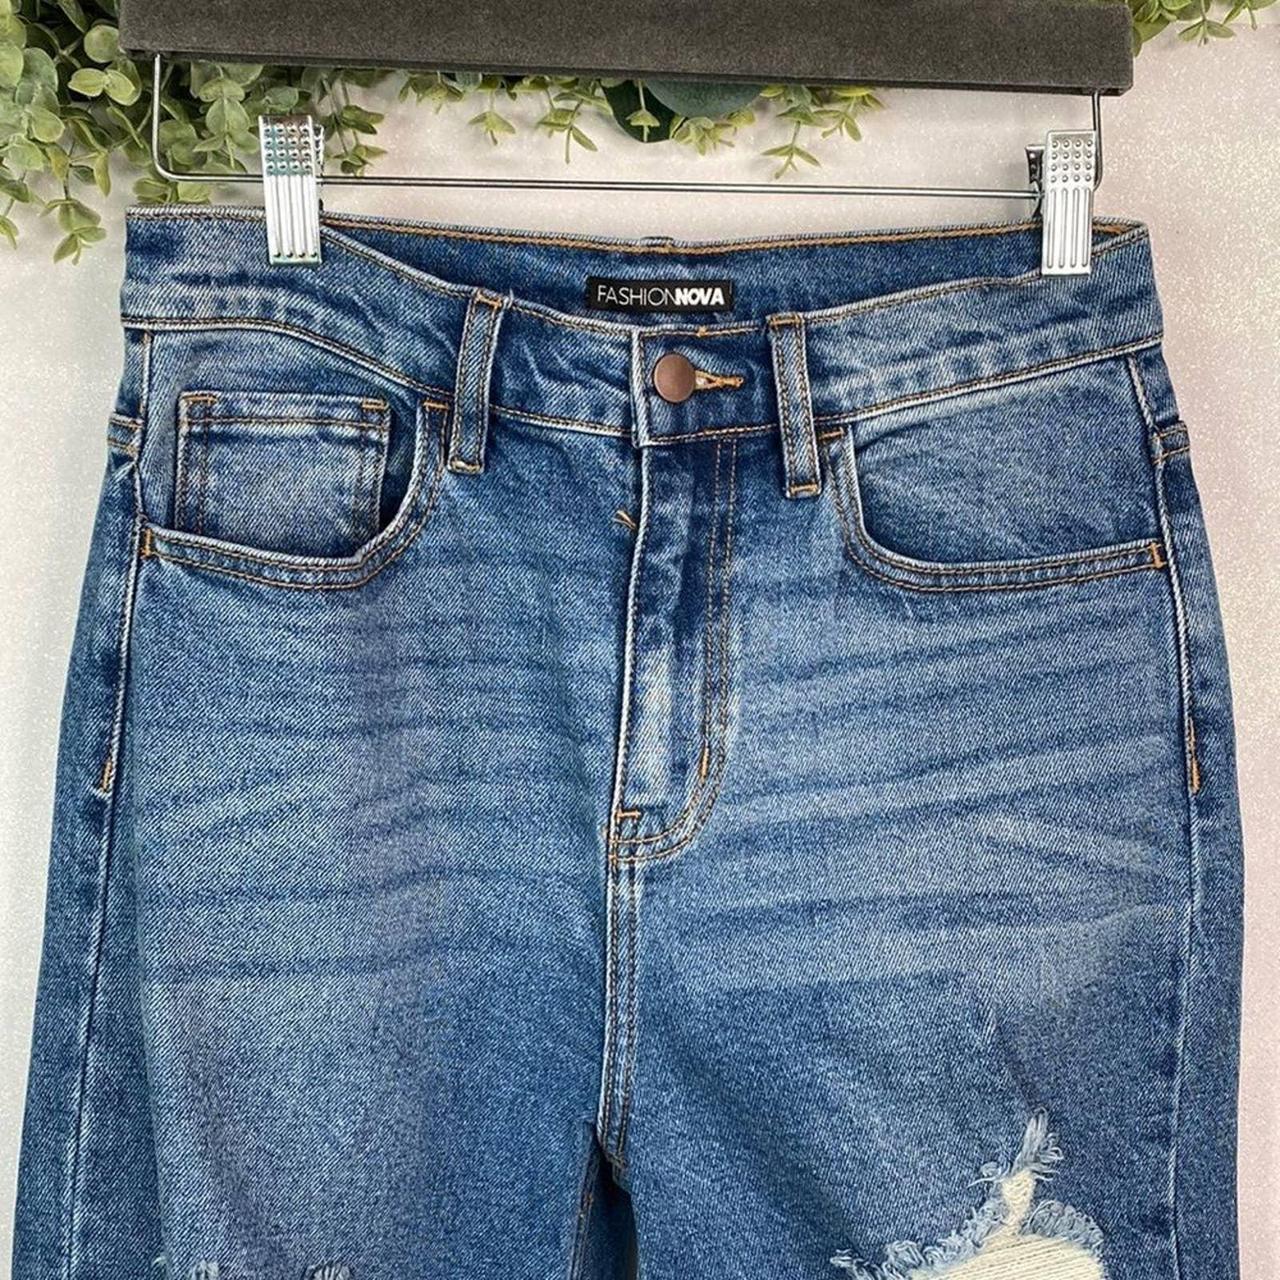 Product Image 3 - Condition: pre-loved, overall Great used